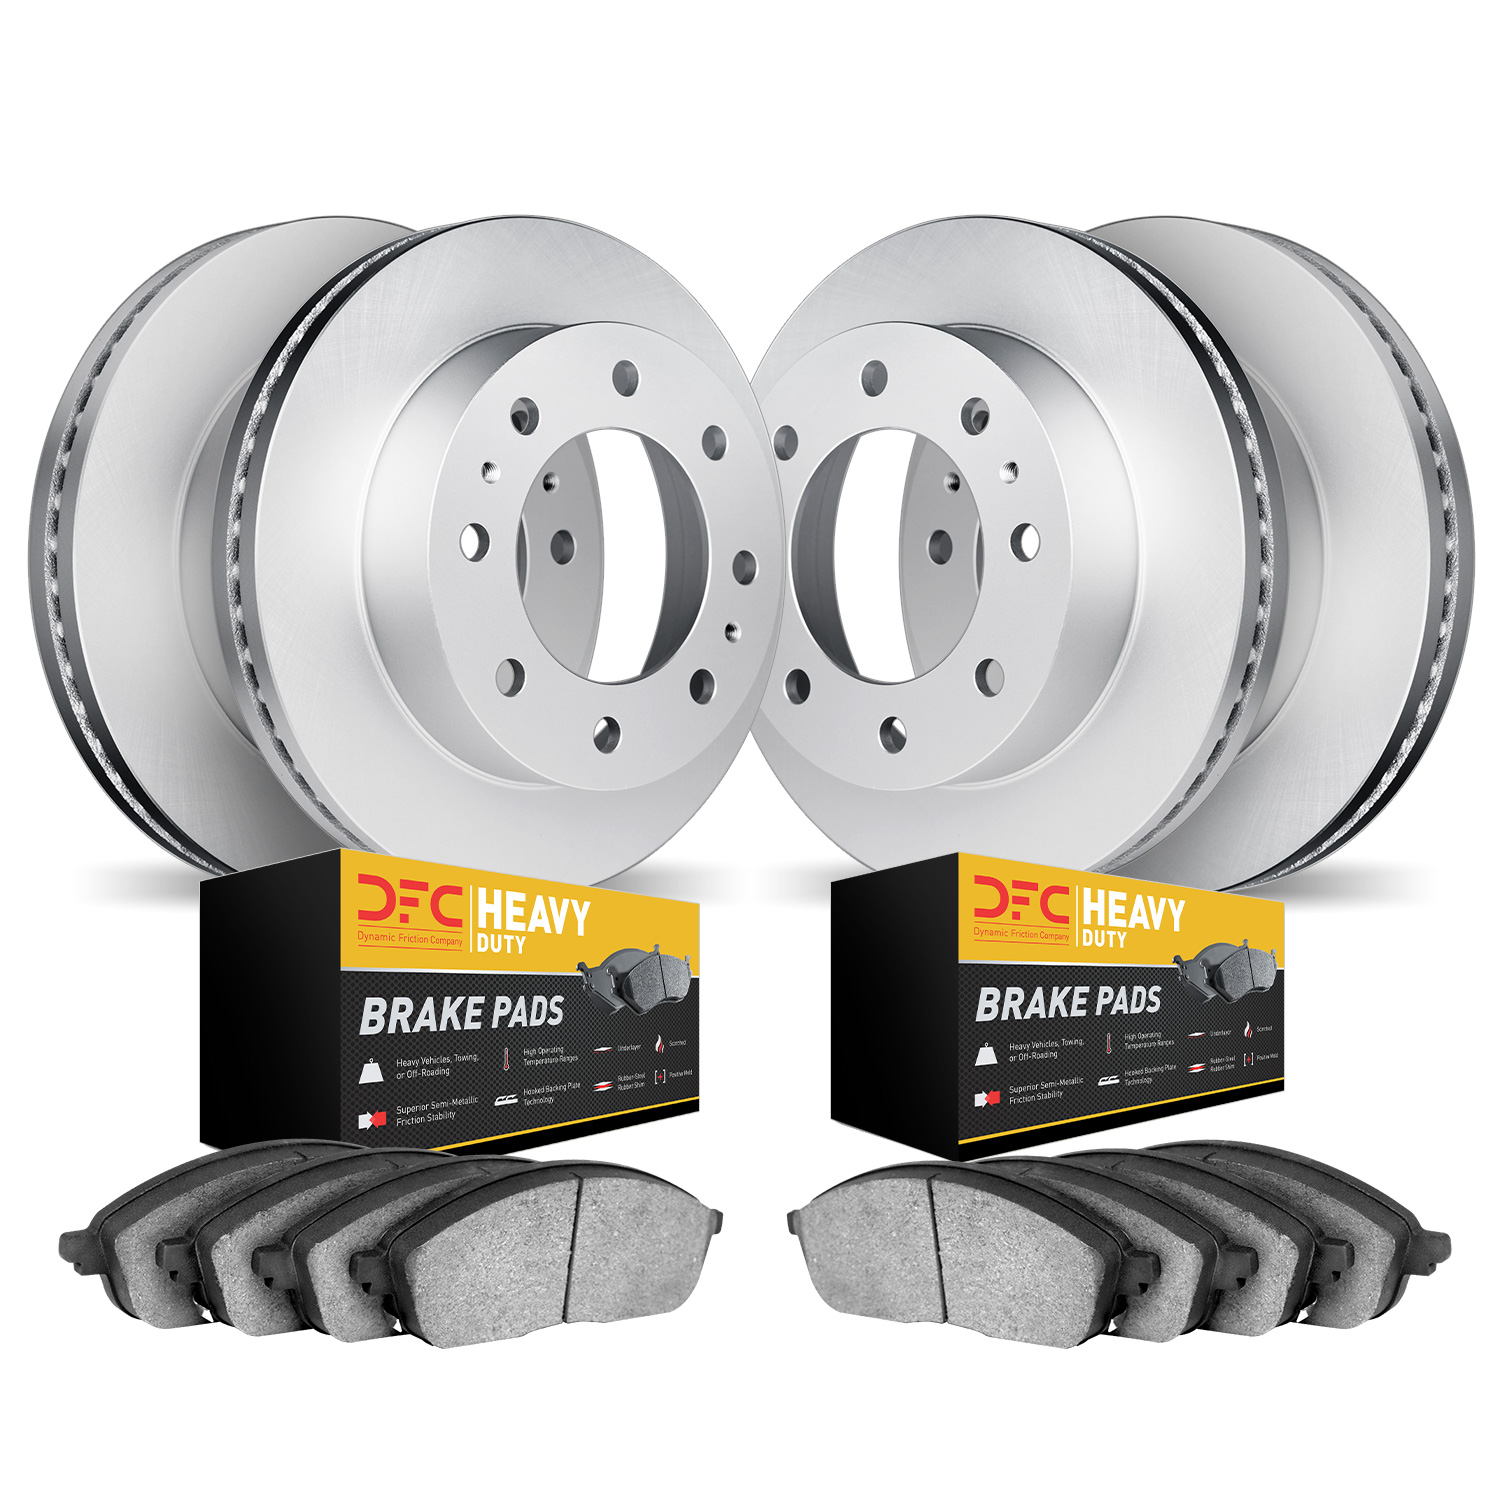 4204-54053 Geospec Brake Rotors w/Heavy-Duty Brake Pads Kit, 2006-2010 Ford/Lincoln/Mercury/Mazda, Position: Front and Rear